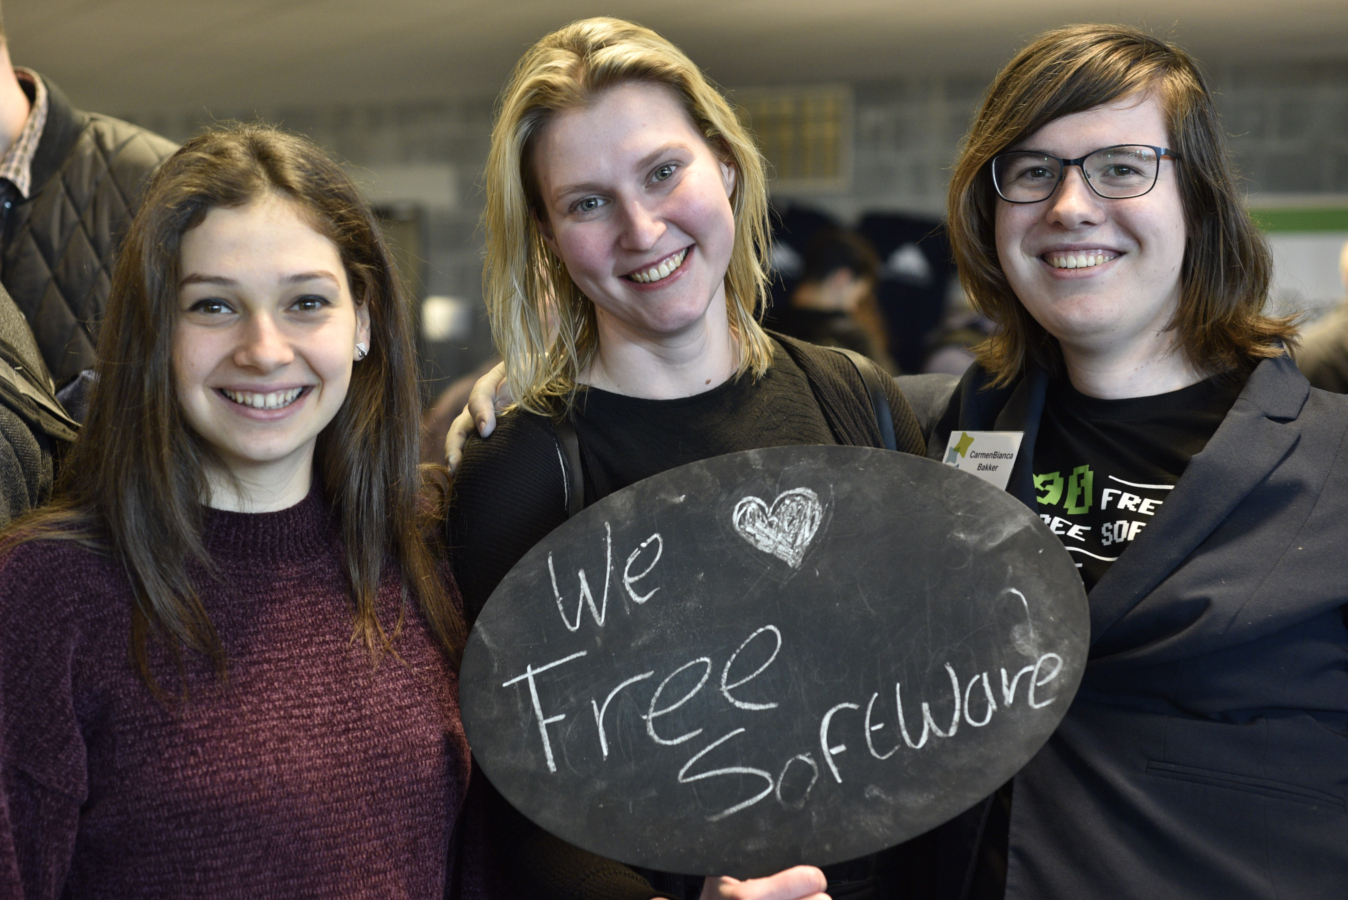 We all love Free Software! (Photograph by Jan Weymeirsch)